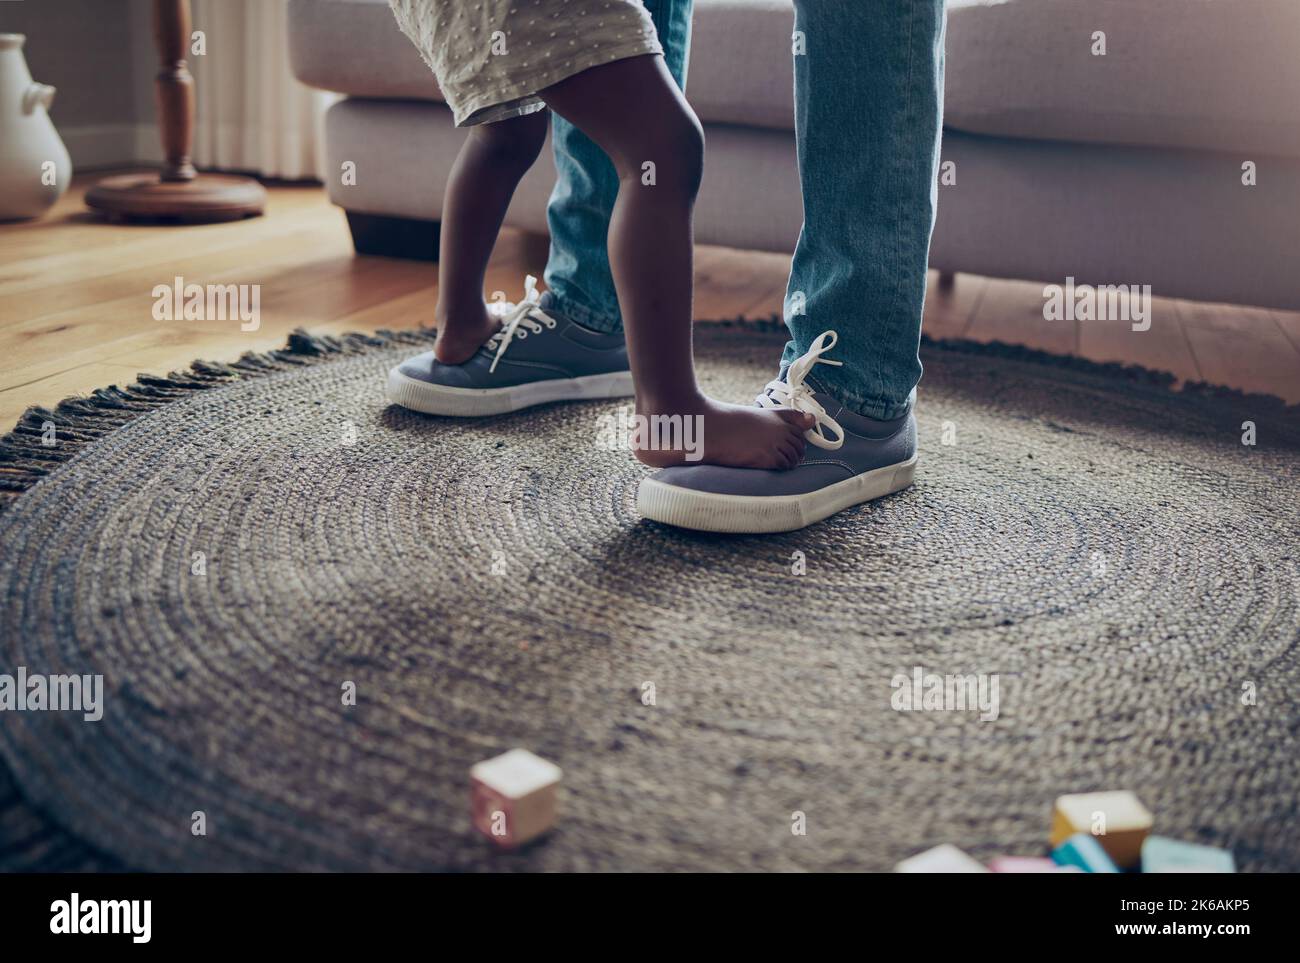 My first dance instructor. an unrecognizable parent and child dancing together at home. Stock Photo